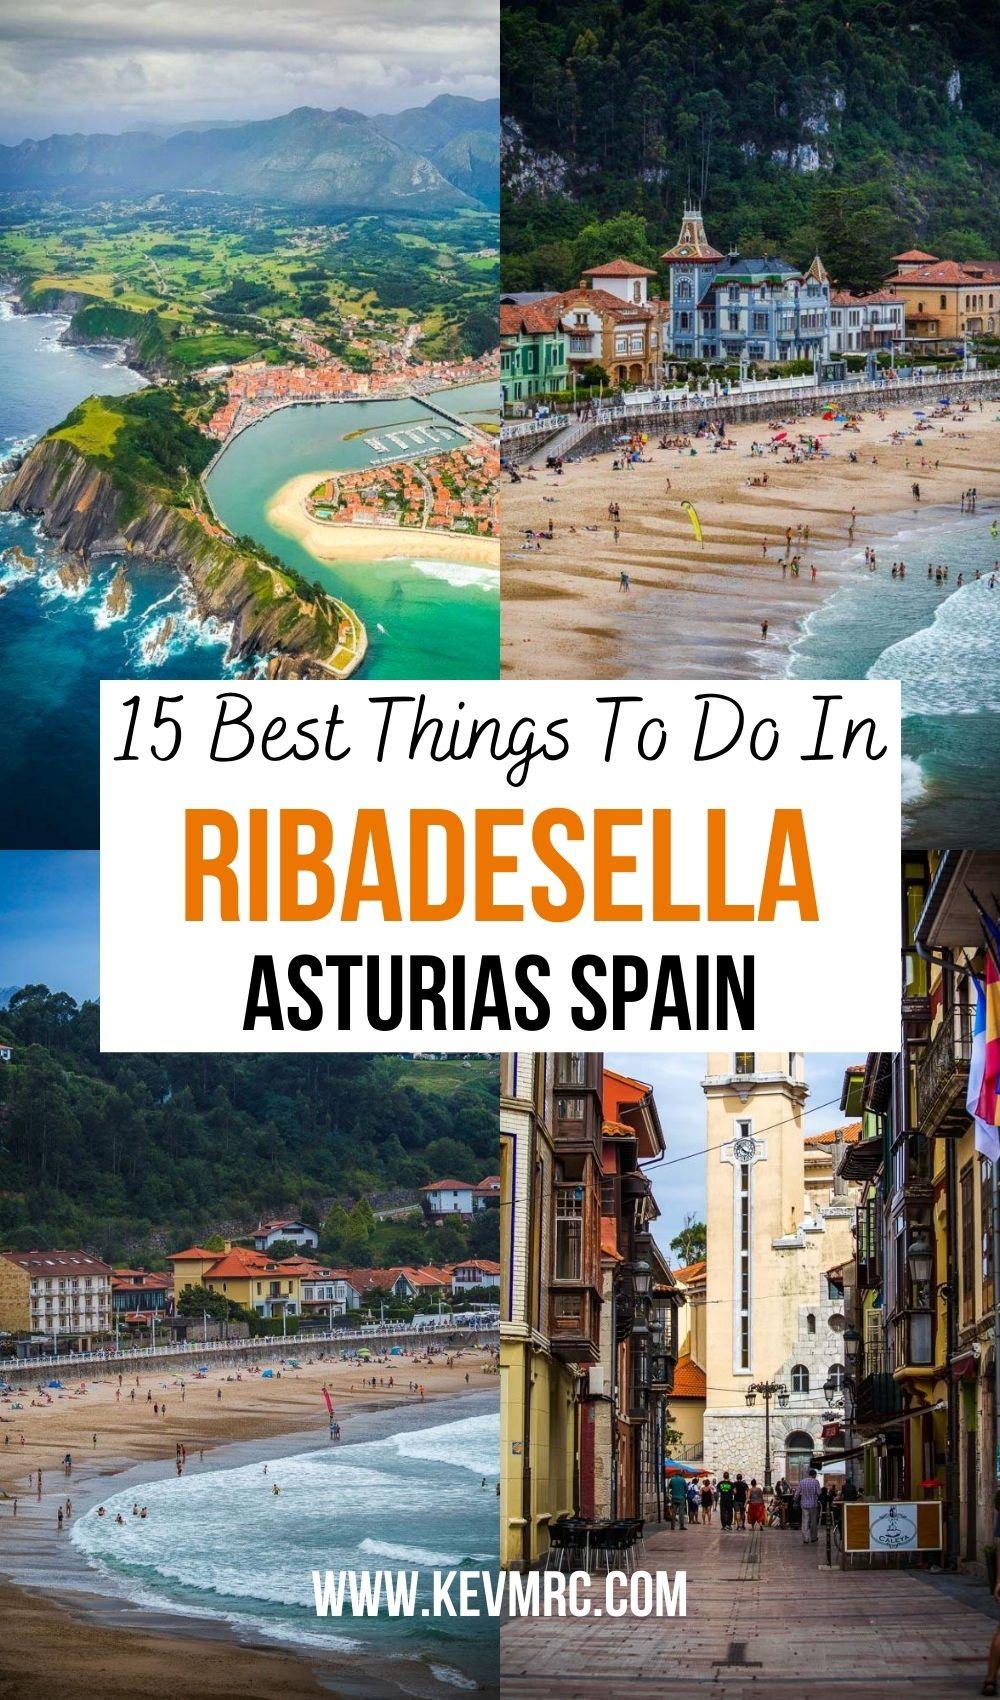 Ribadesella is one of the most charming coastal towns in Asturias Spain. It's a great place to recover from all the adventures, but there's much to explore in town. It also has one of the most beautiful beaches in Asturias! ribadesella asturias | que ver en ribadesella